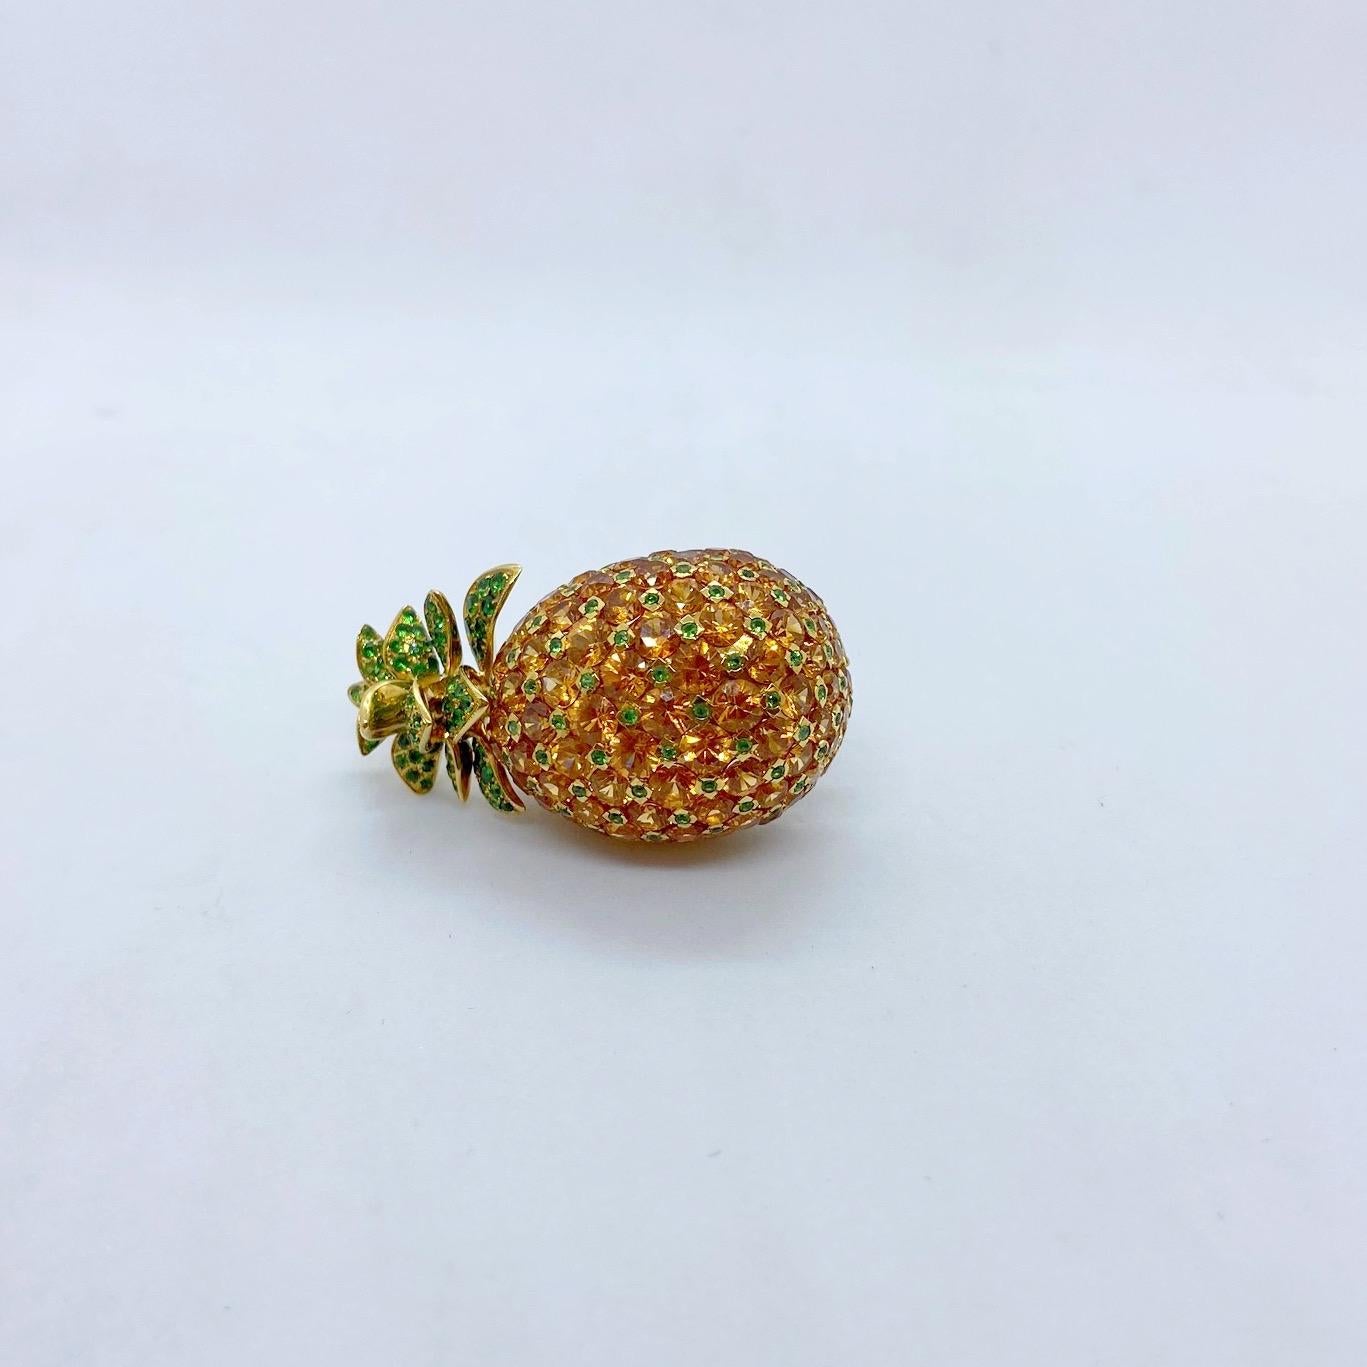 Contemporary Cellini 18KT YG Pineapple Brooch with 21.75 Carat Orange Garnets and Tsavorites For Sale